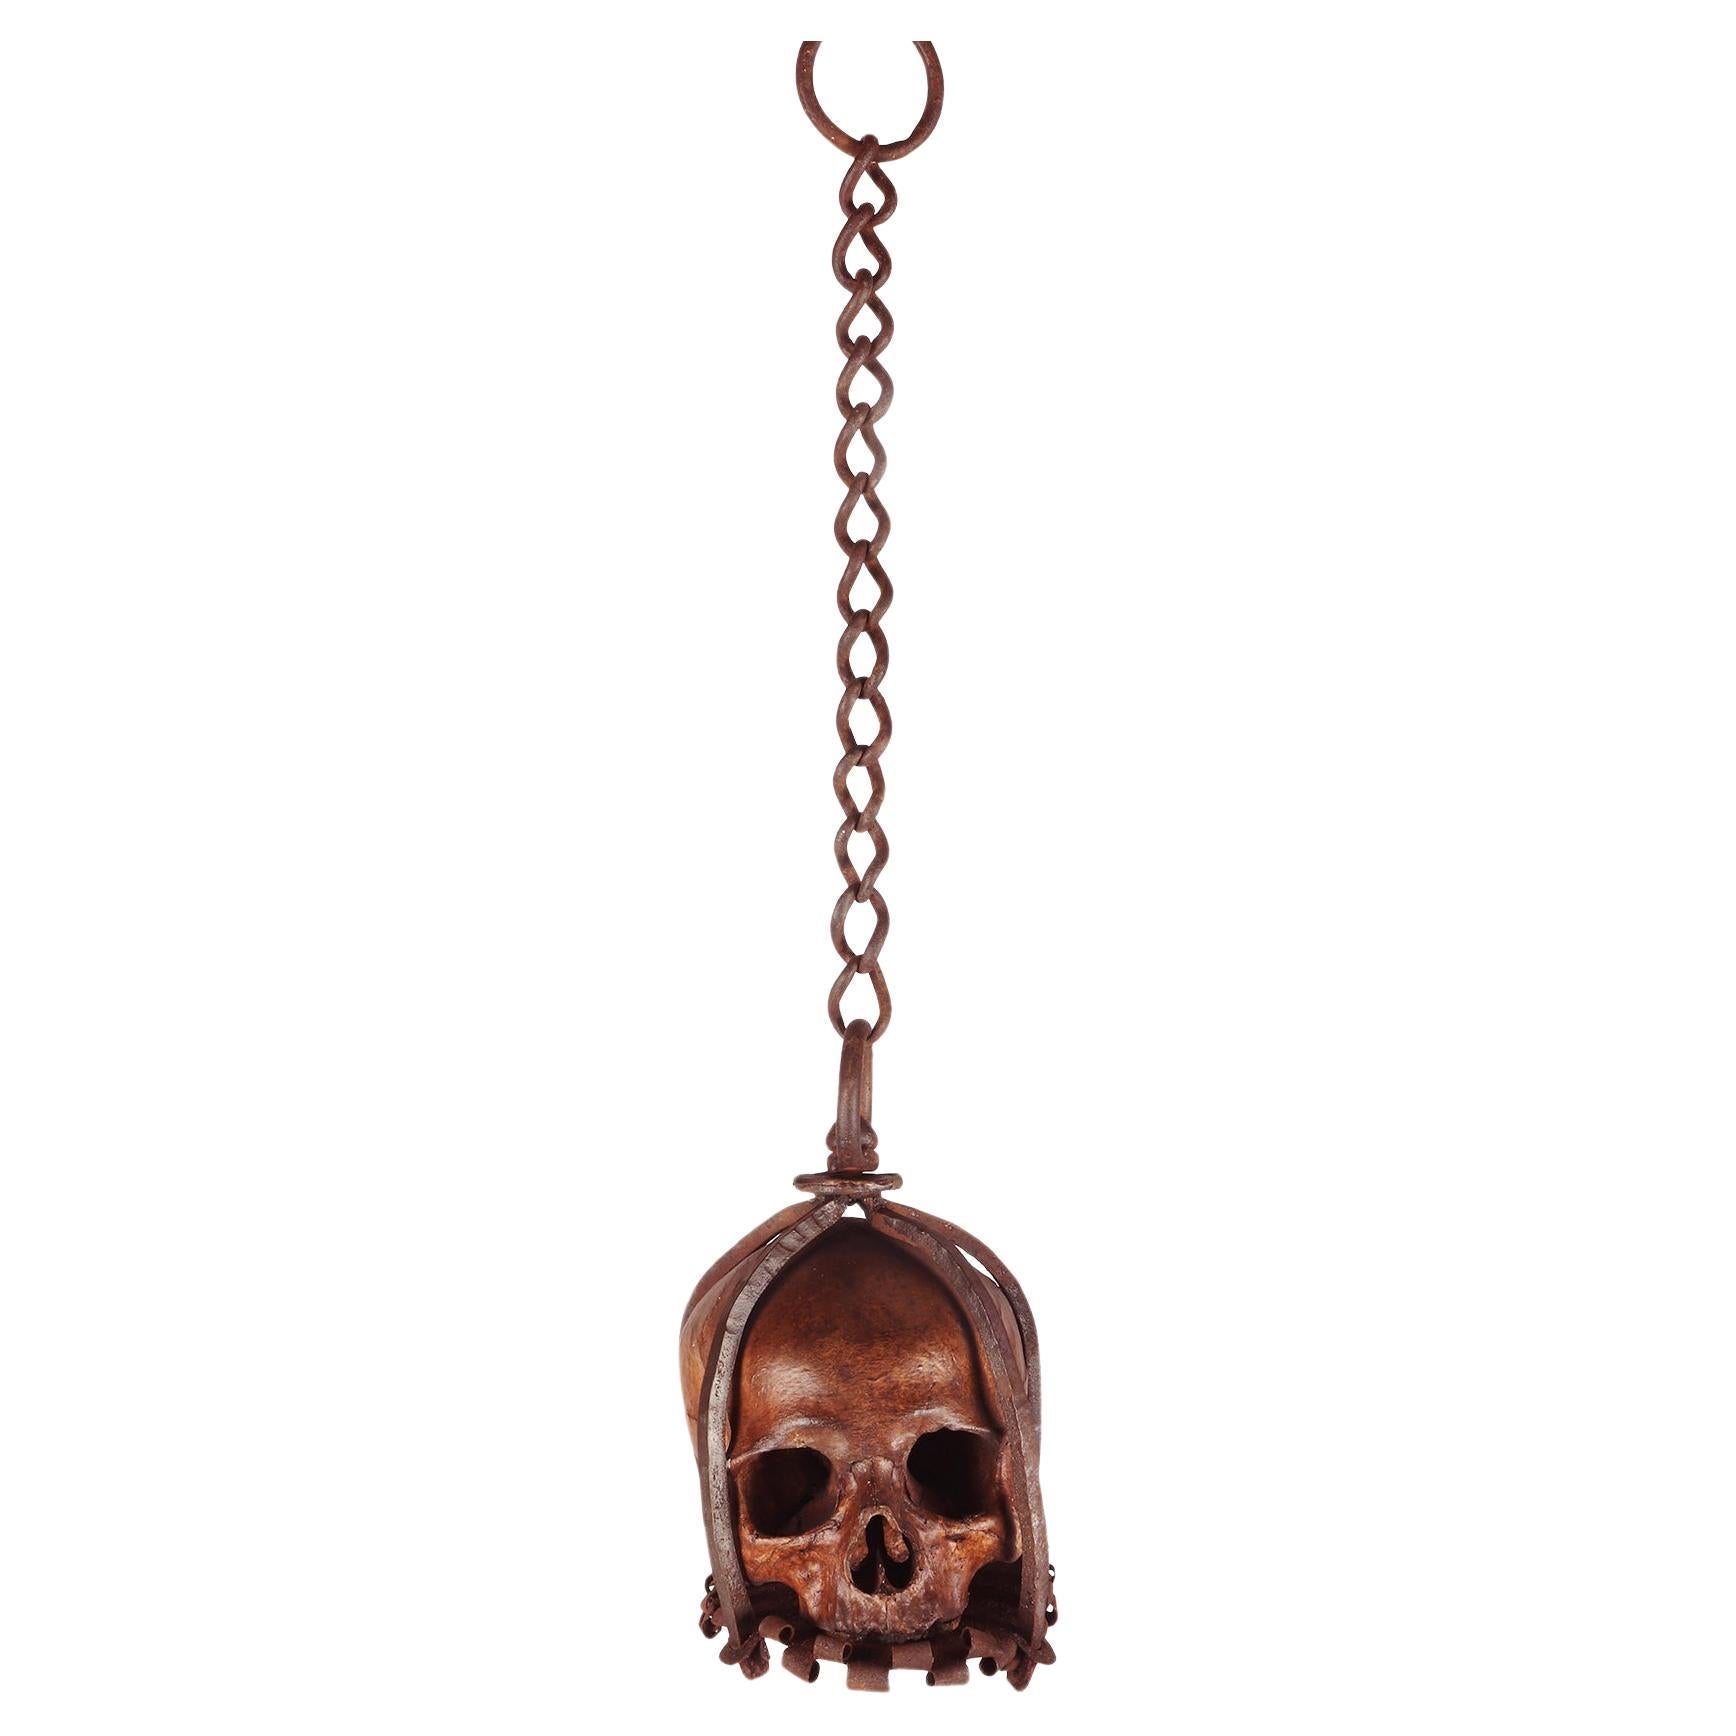 A rare example of Memento Mori from Wunderkammer depicting a skull caged in a forged iron structure, with a chain for hanging. The sculpture is made of scagliola plaster with a high artistic and executive level. It rests on a coplanar base plate,